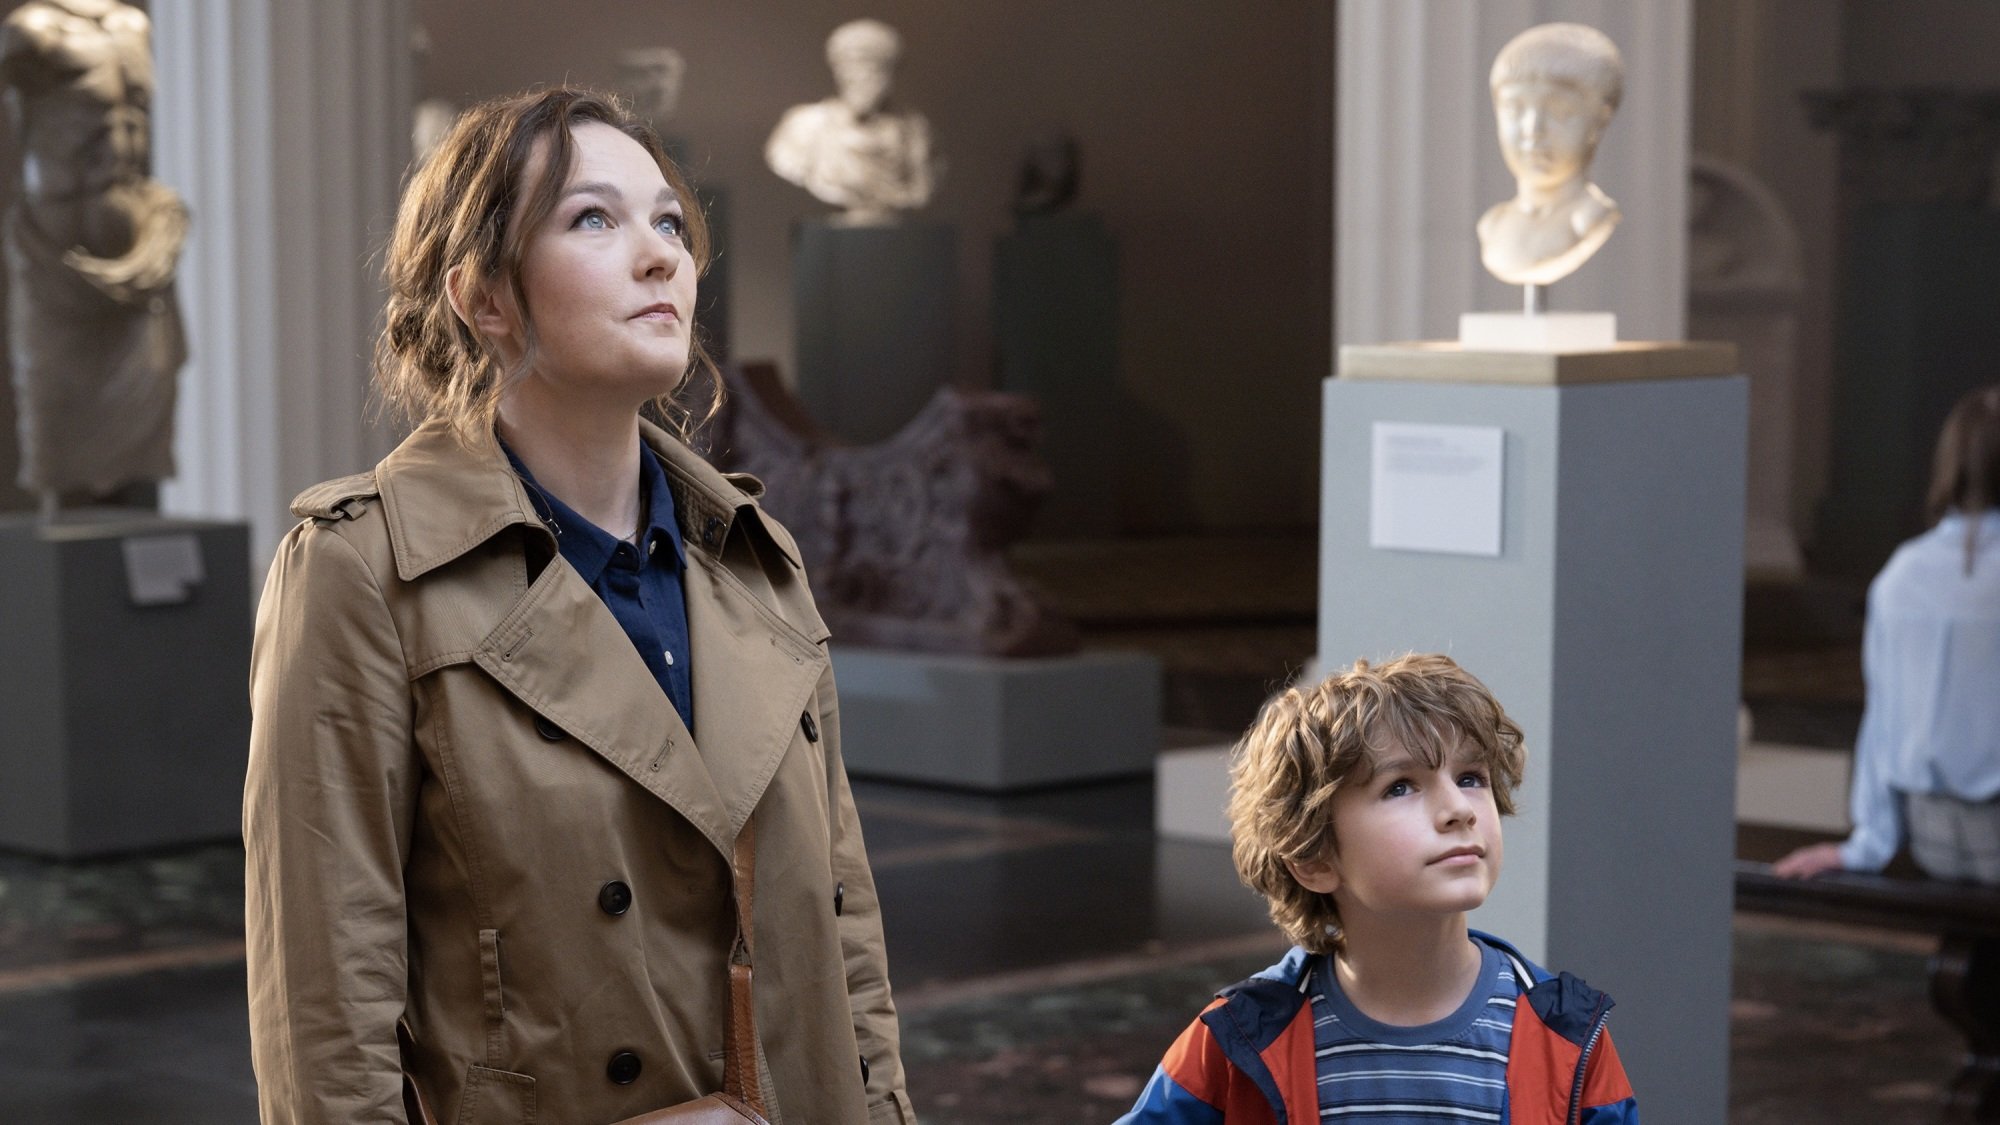 A woman and her young son in a hall of statues in a museum.